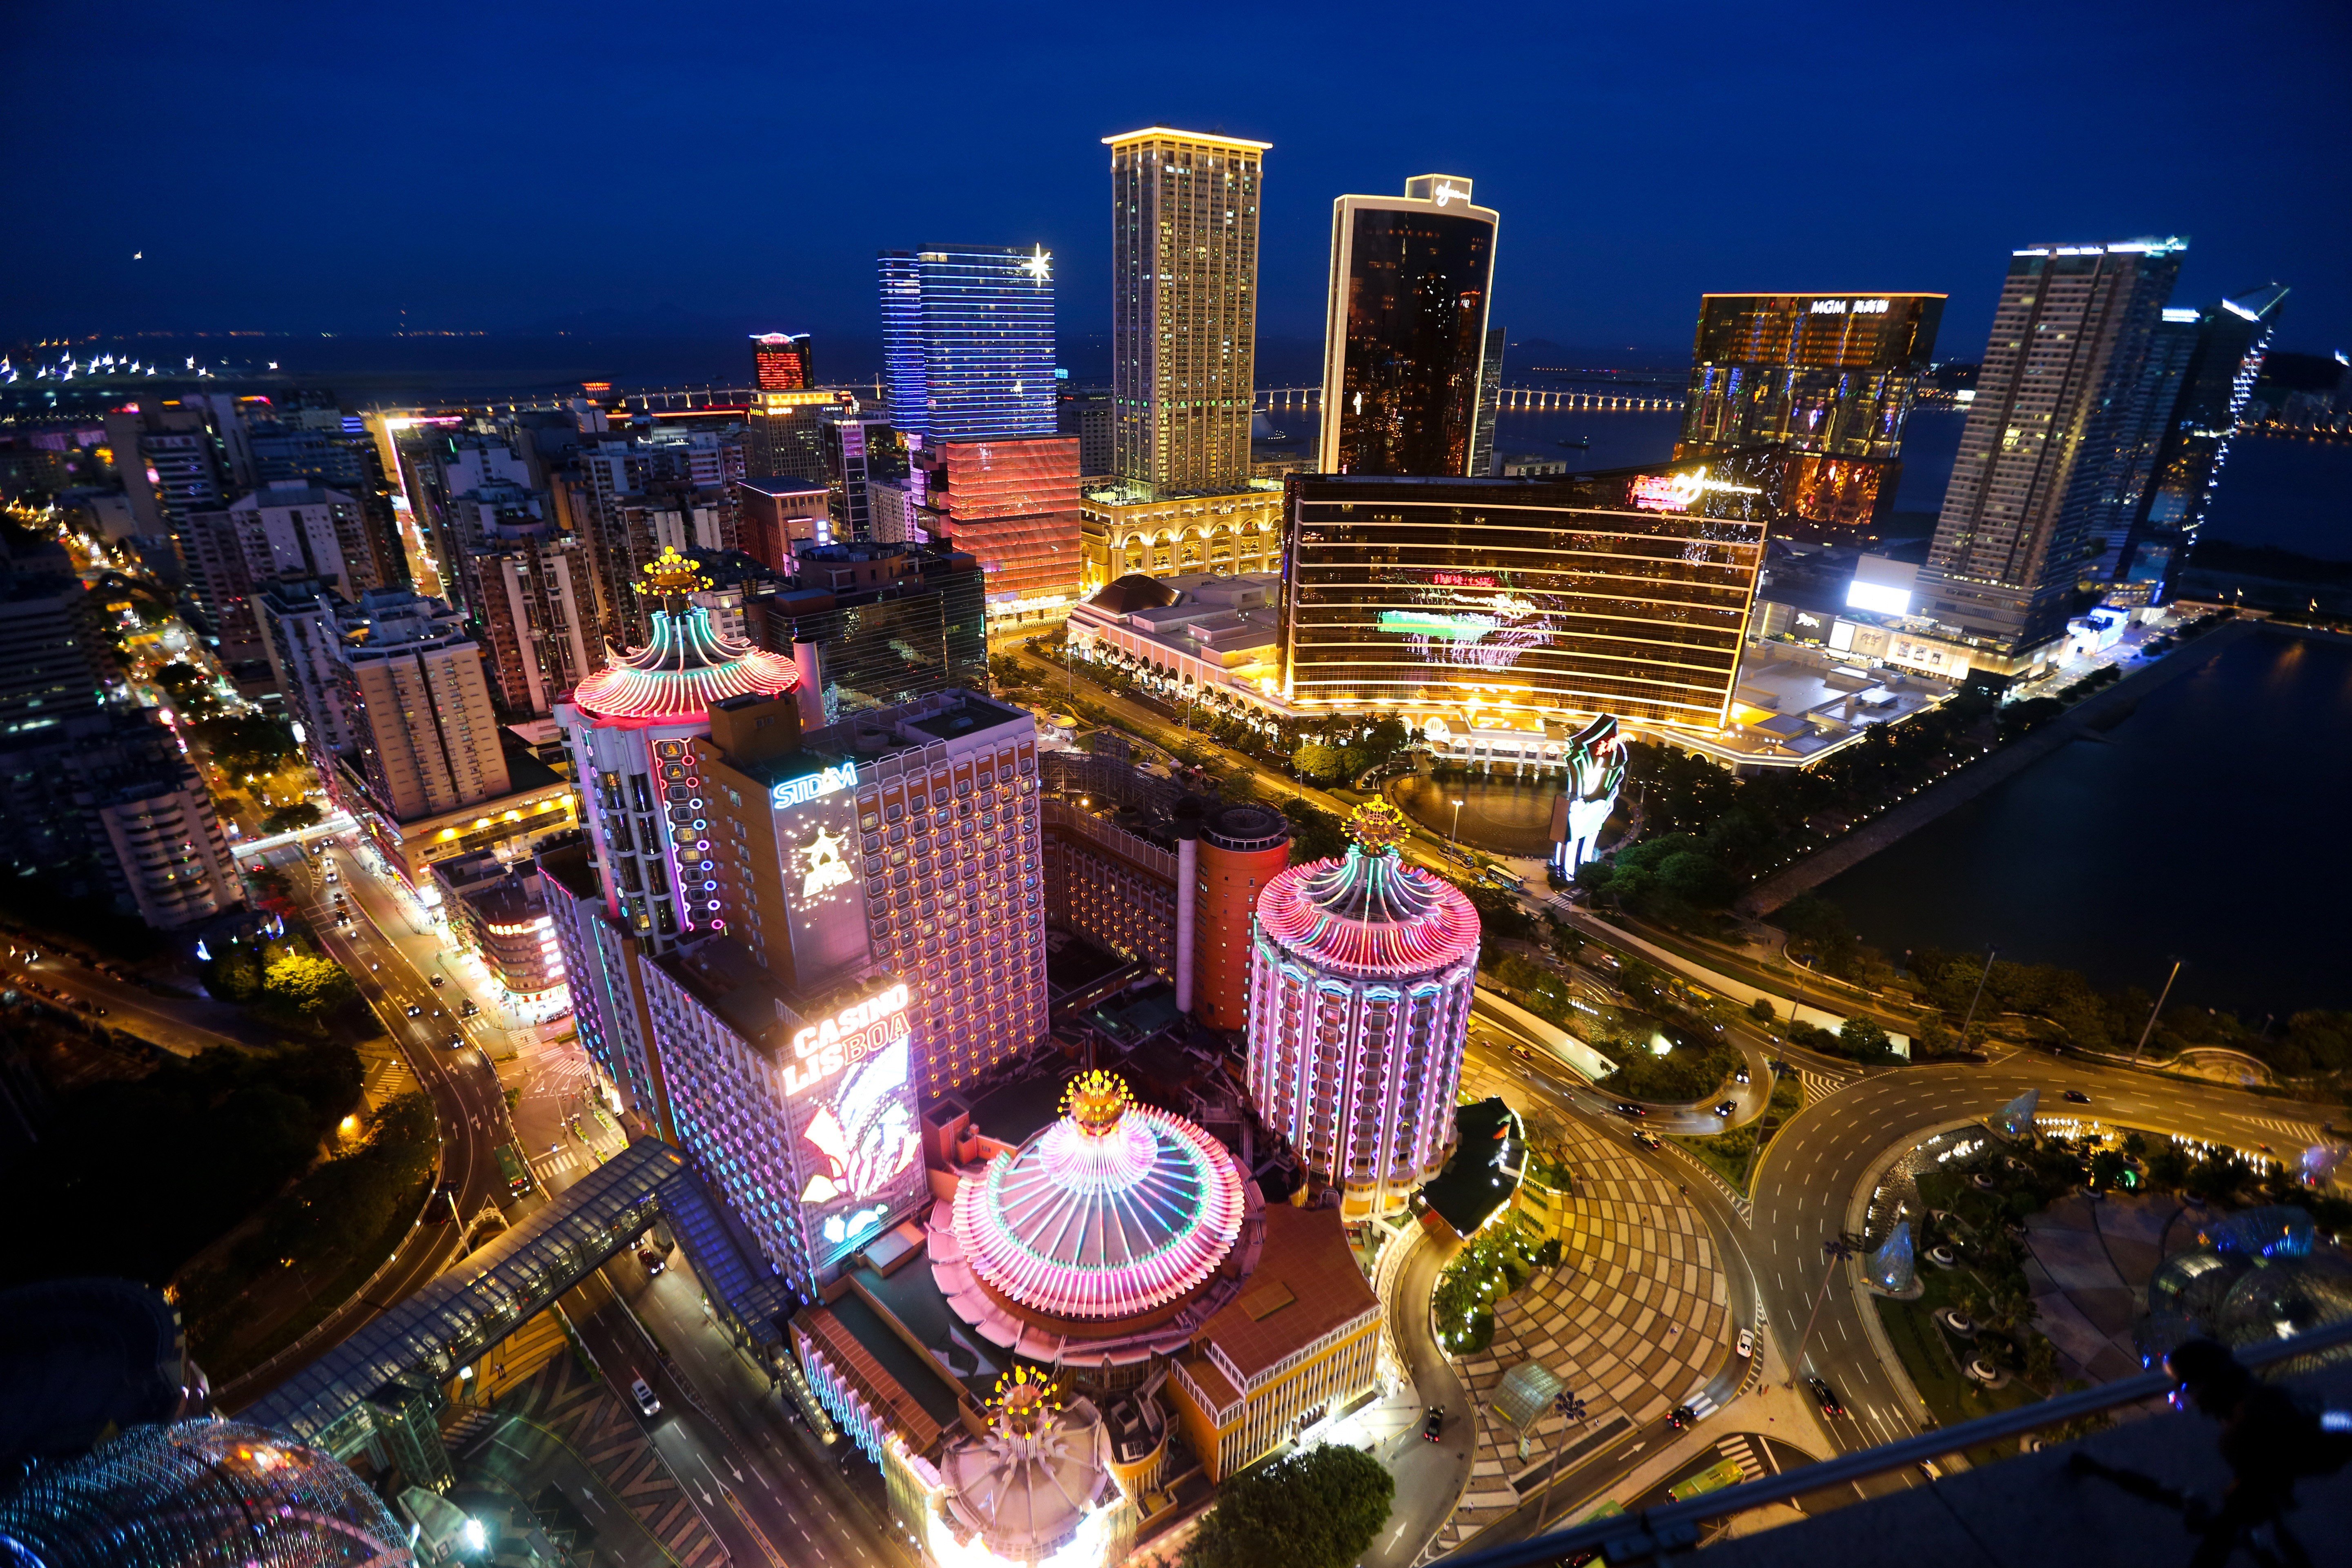 Macau is also one of the most densely packed cities on the planet. Photo: Handout